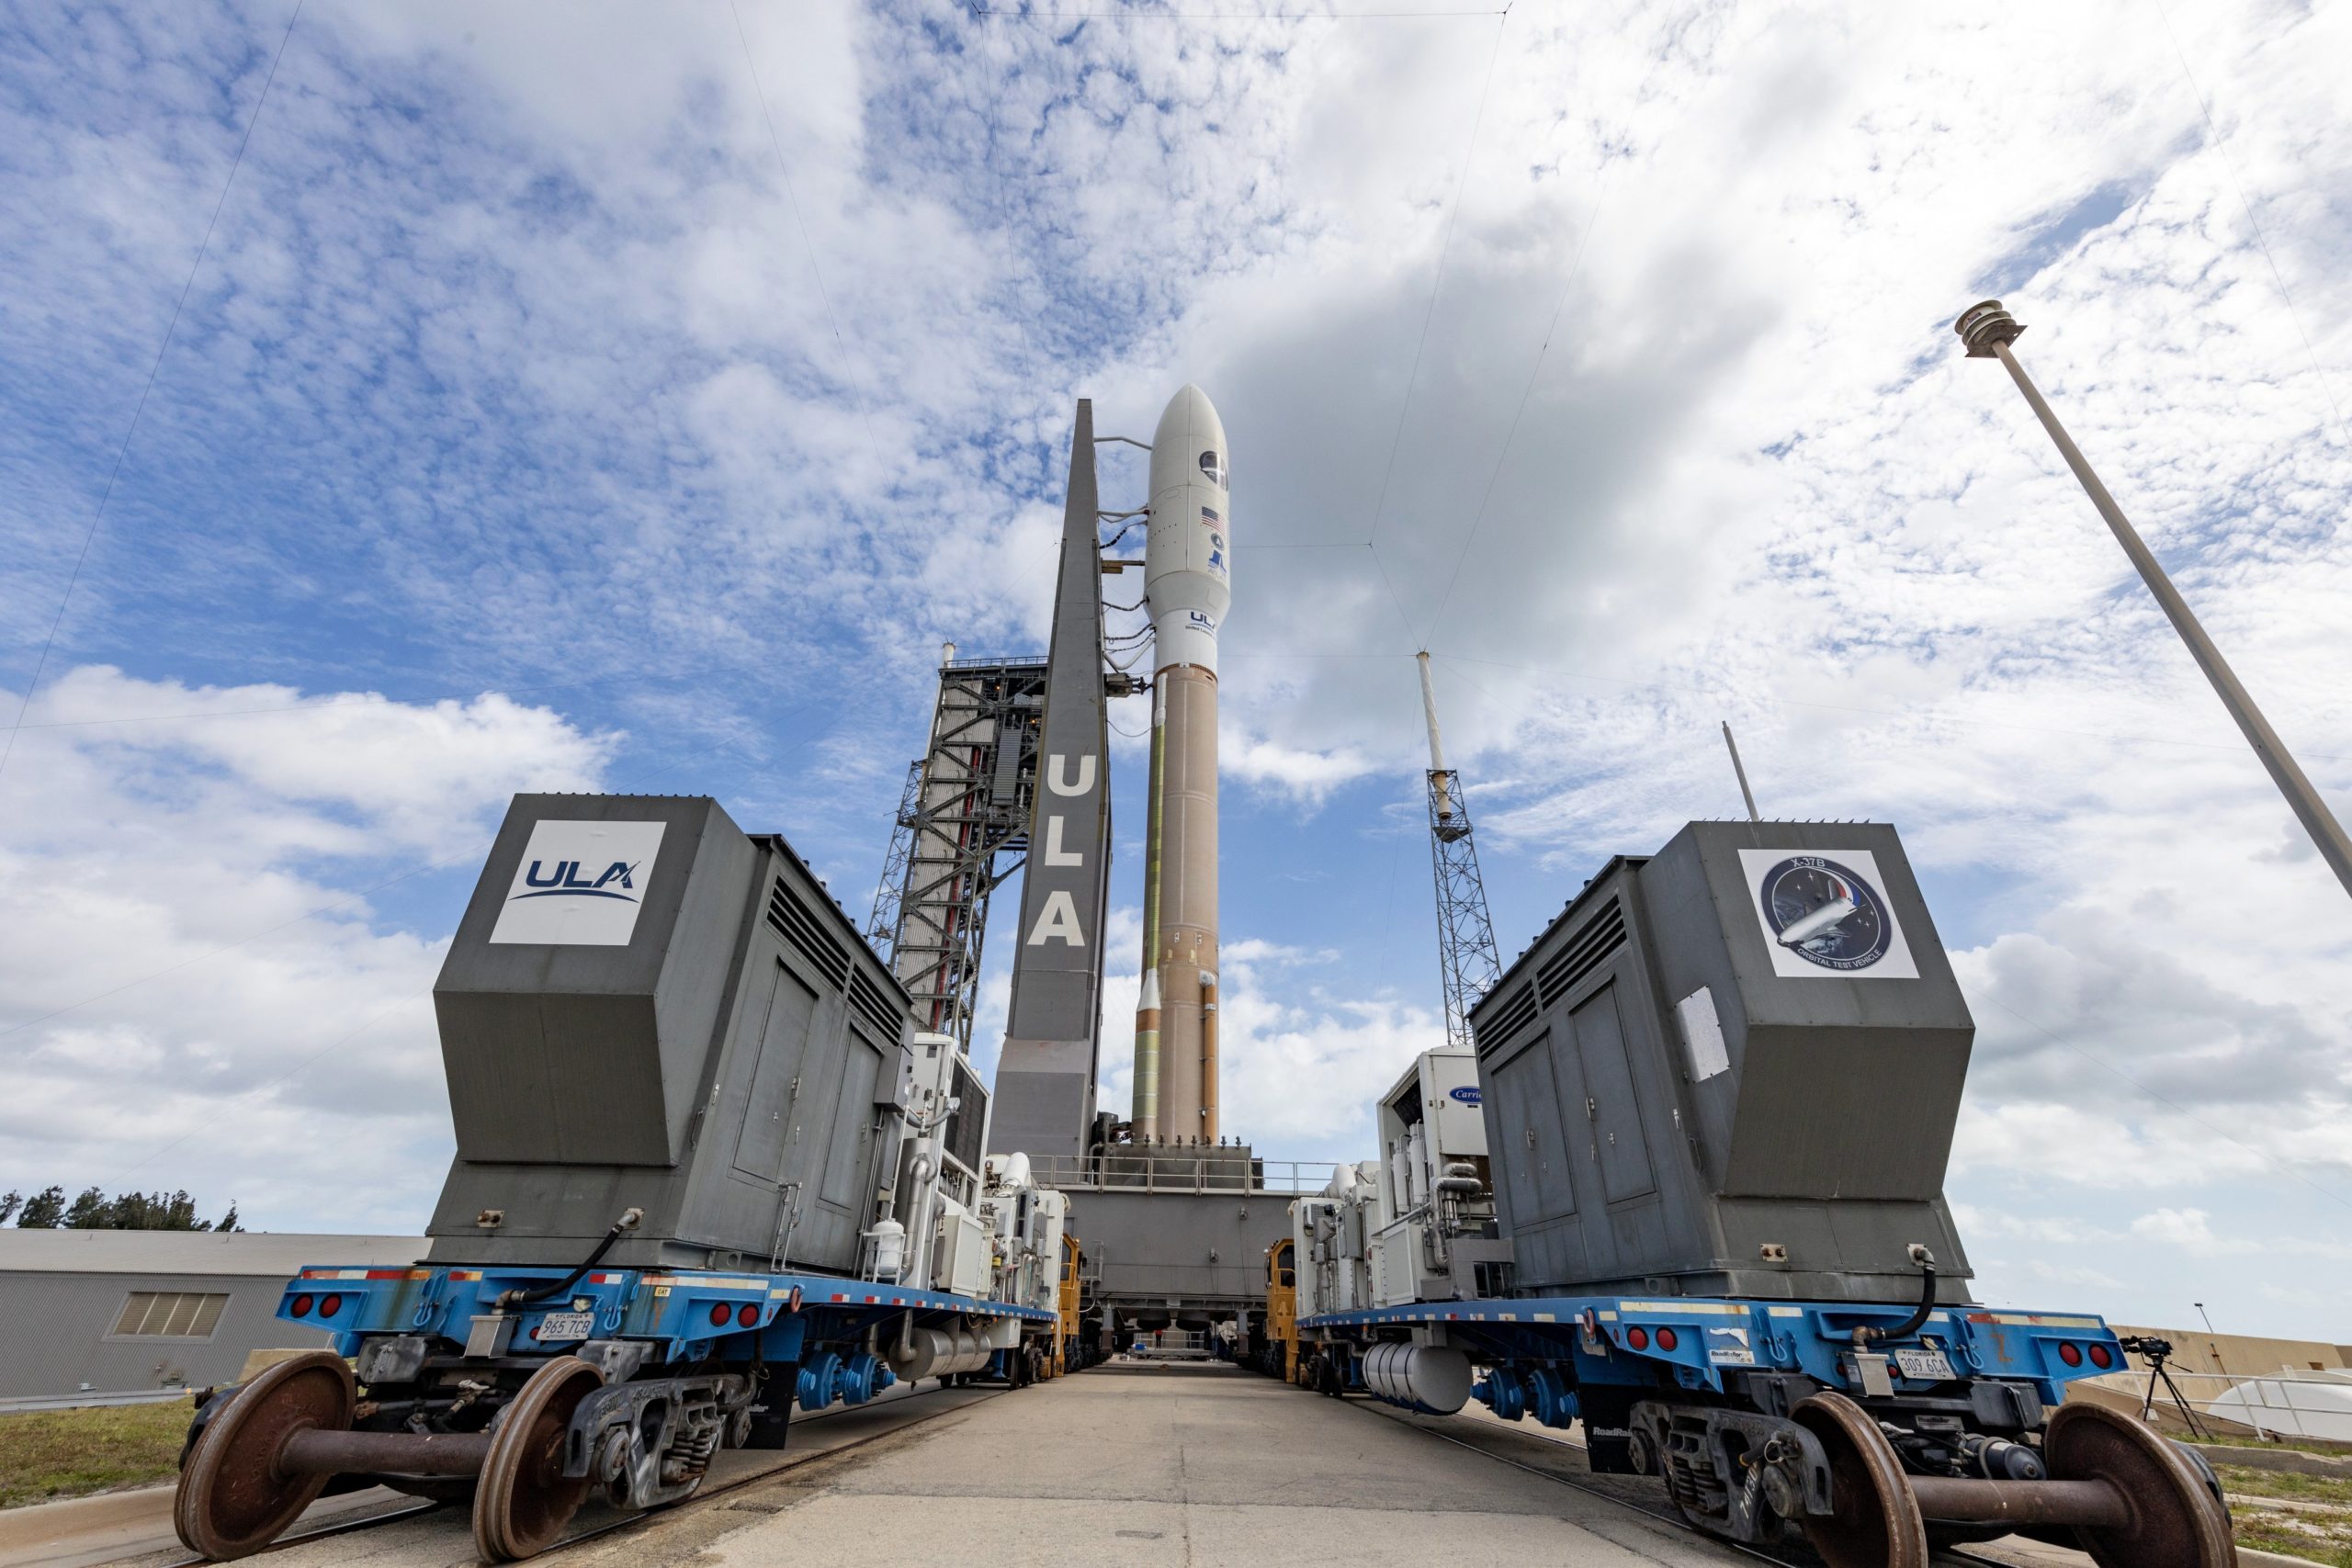 Weekend Launch Double Header on Tap from Florida Space Coast by ULA and SpaceX: Watch Live